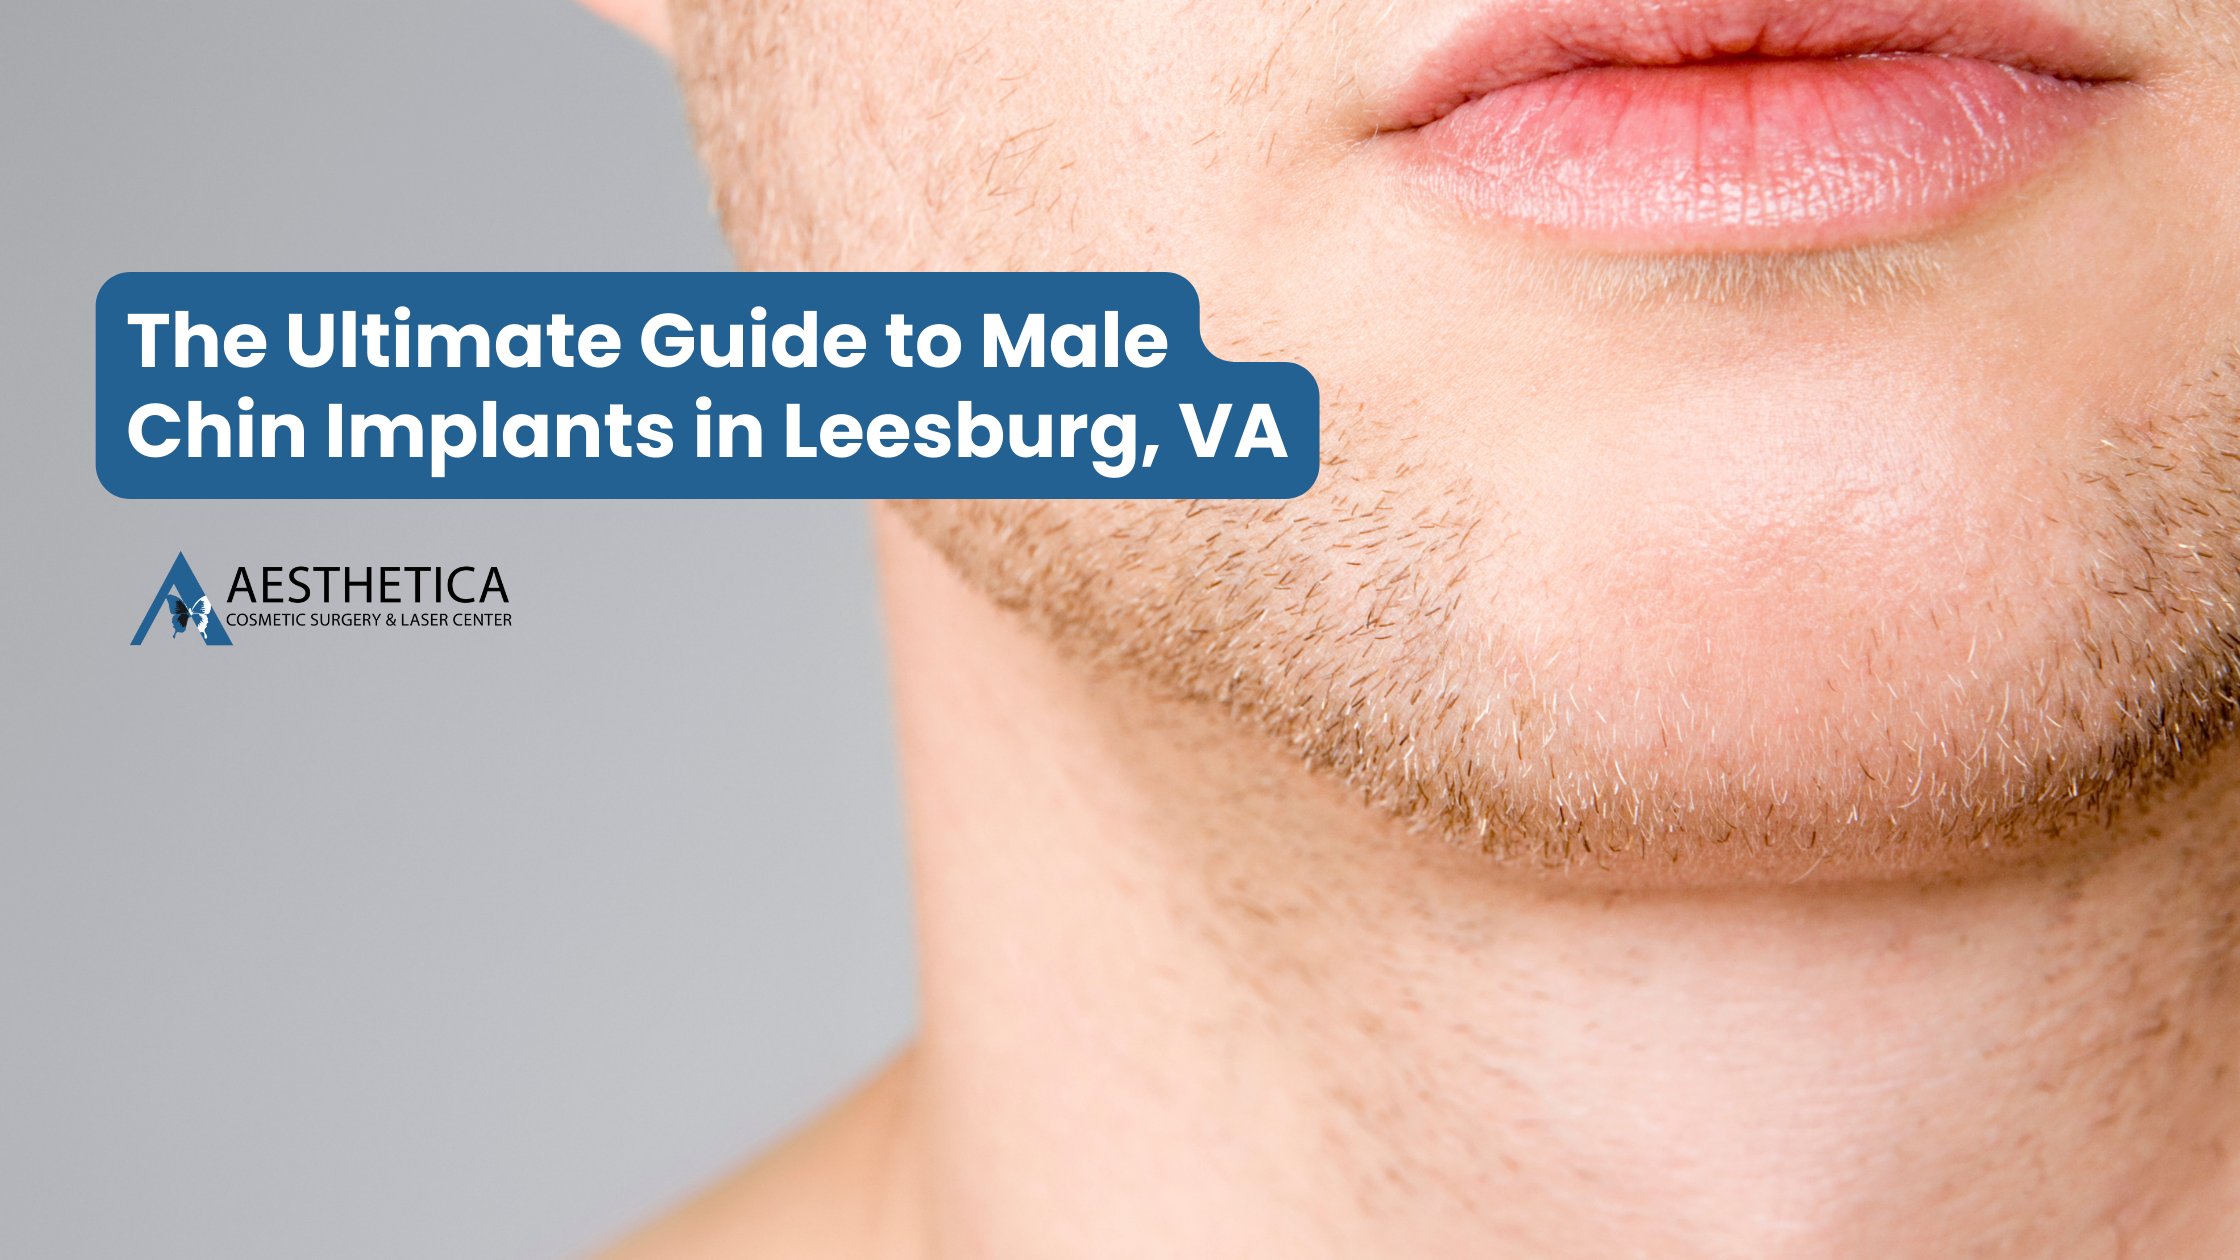 The Ultimate Guide to Male Chin Implants in Leesburg, VA